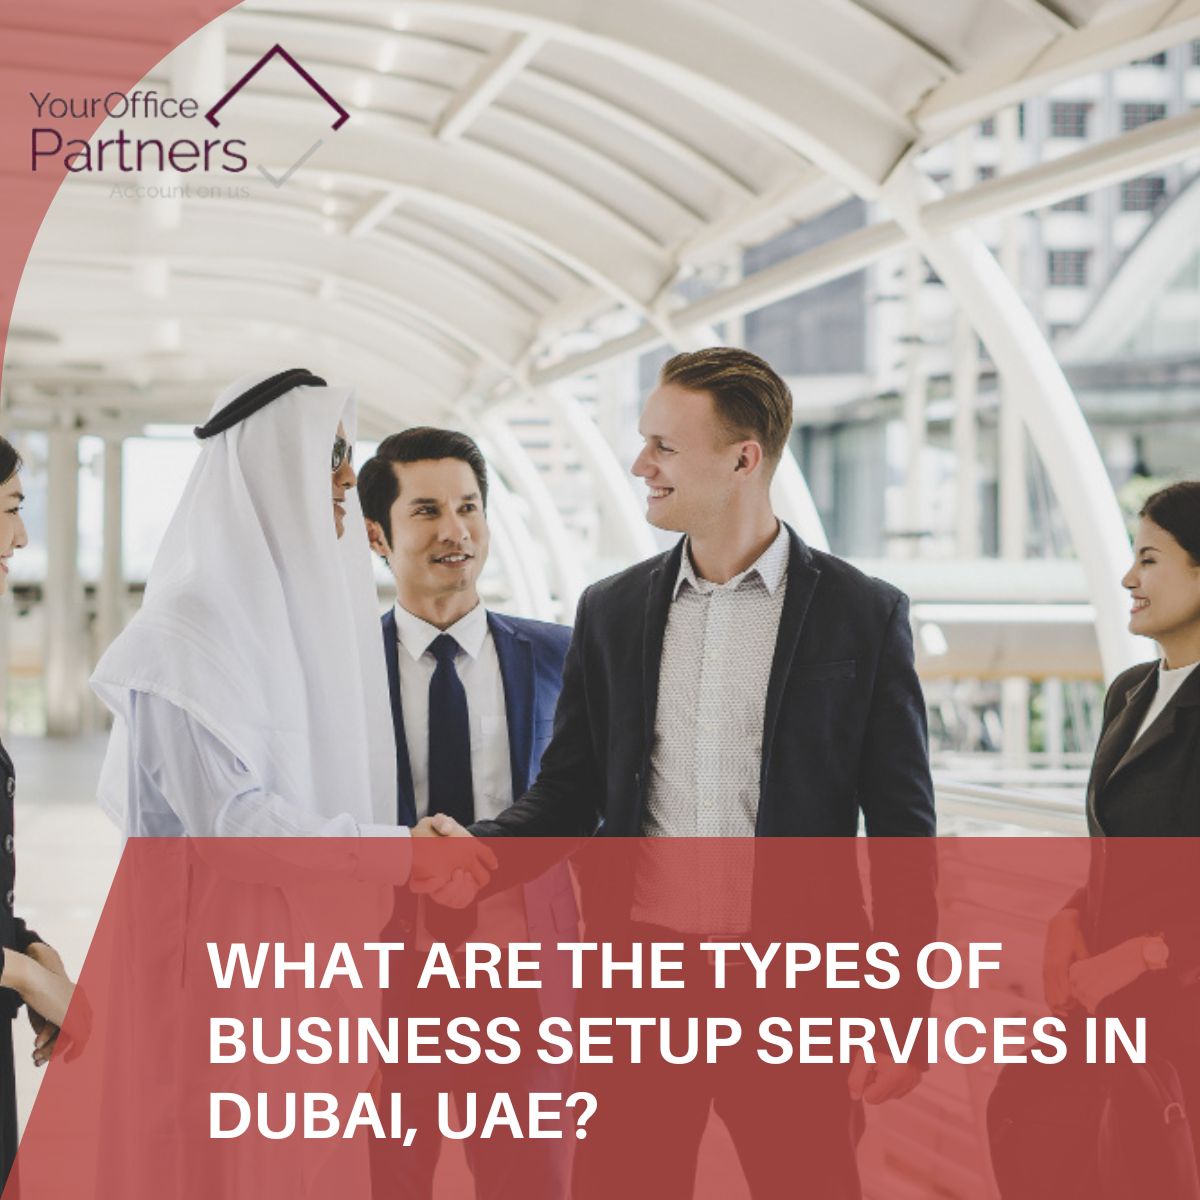 What types of business setup services are available in Dubai, UAE?